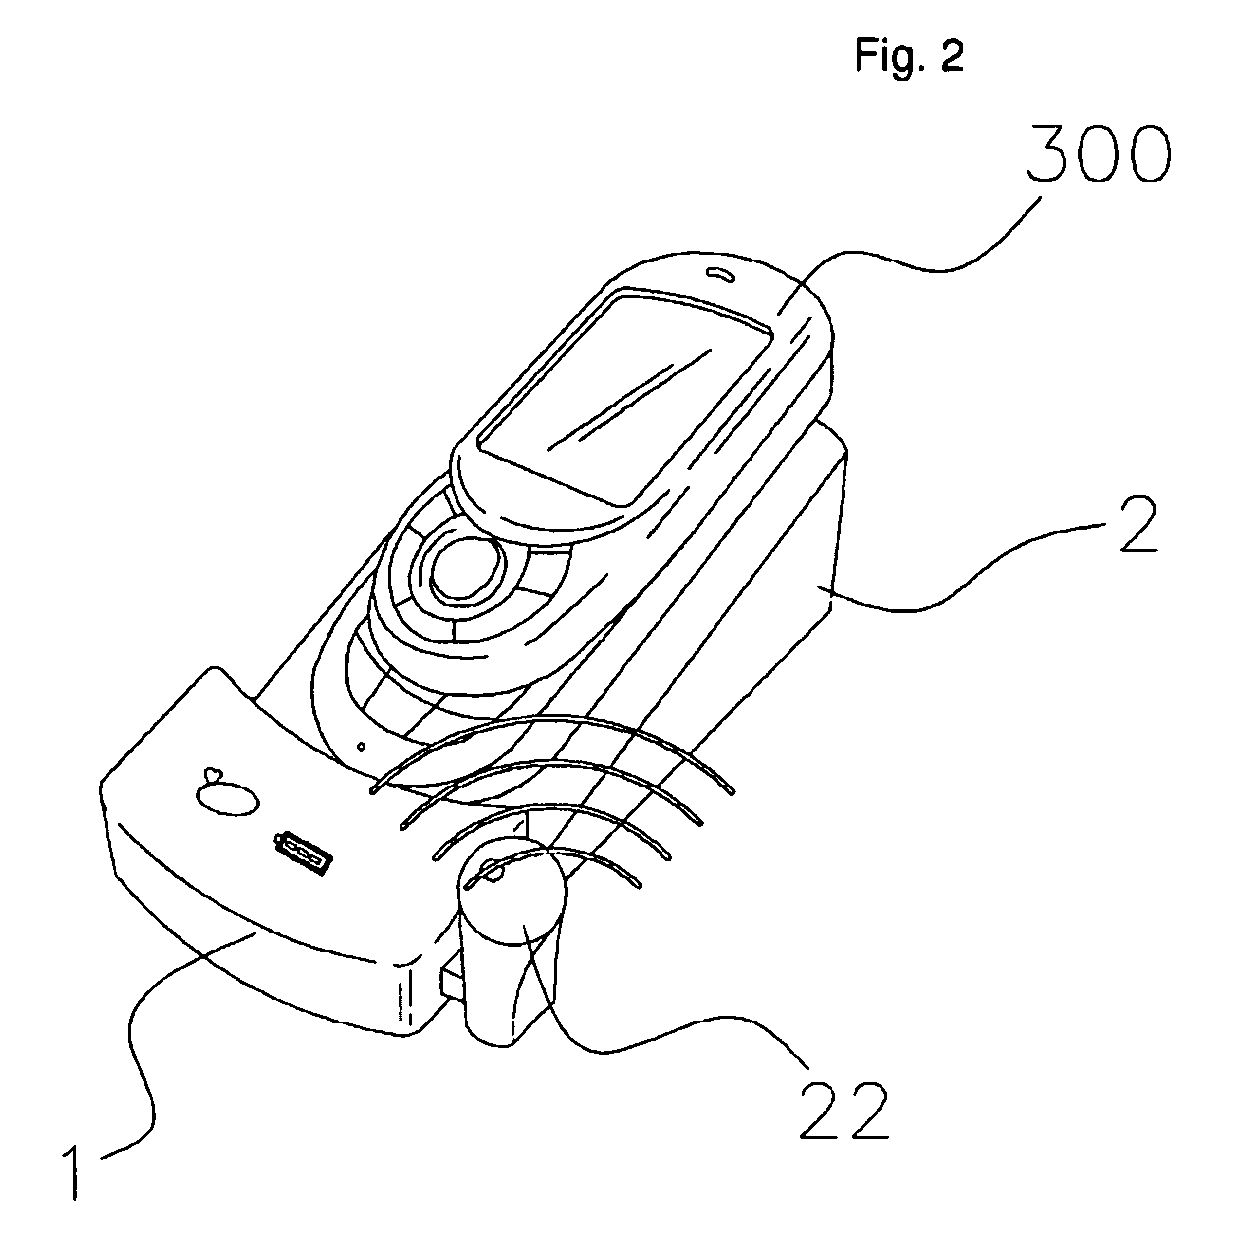 Non-contact charger available of wireless data and power transmission, charging battery-pack and mobile device using non-contact charger